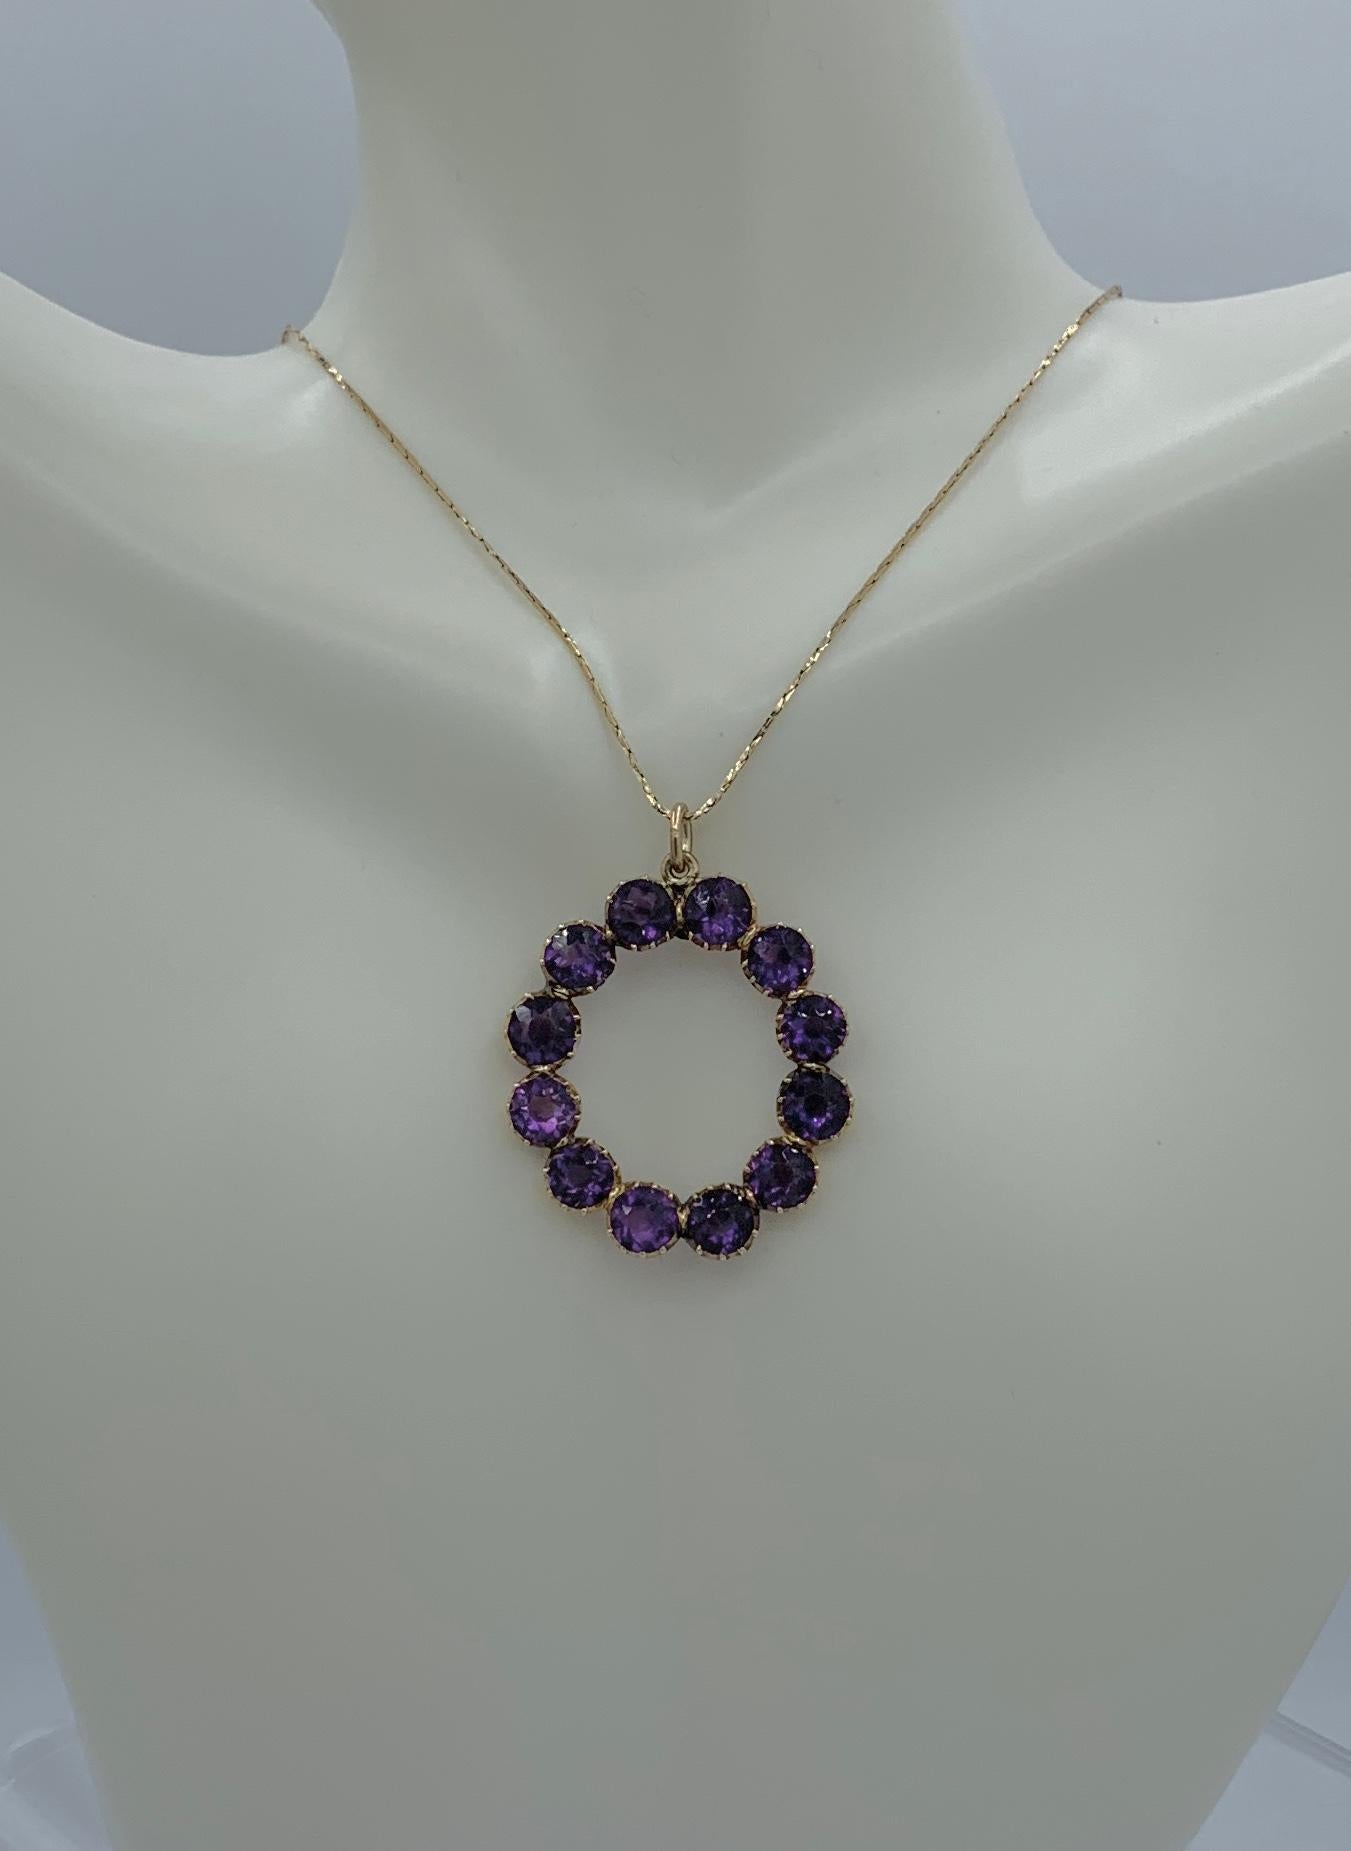 This is a beautiful antique 9 Carat Siberian Amethyst Victorian - Art Deco Circle Pendant in 14 Karat Gold.  The oval shaped pendant is set with 12 round faceted Siberian Amethysts that total approximately 9 Carats.   The color and radiance of the